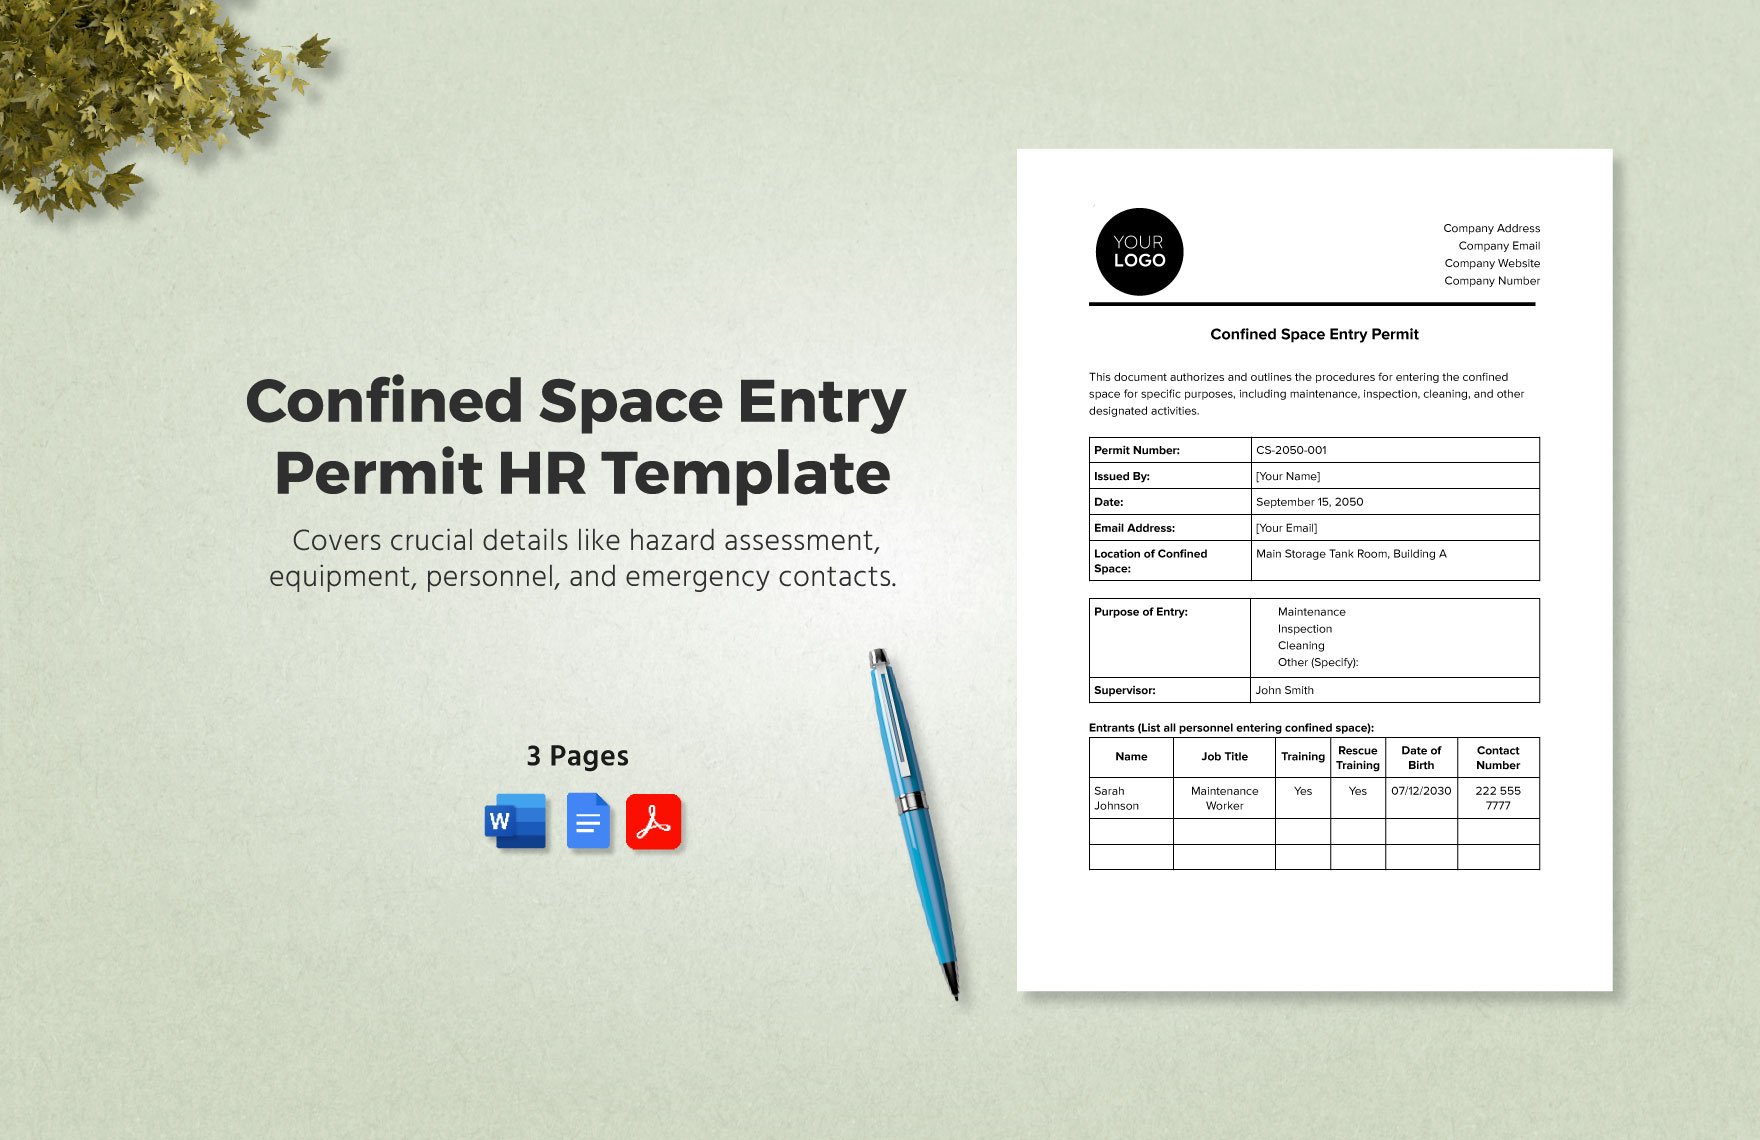 Confined Space Entry Permit HR Template in Word, Google Docs, PDF